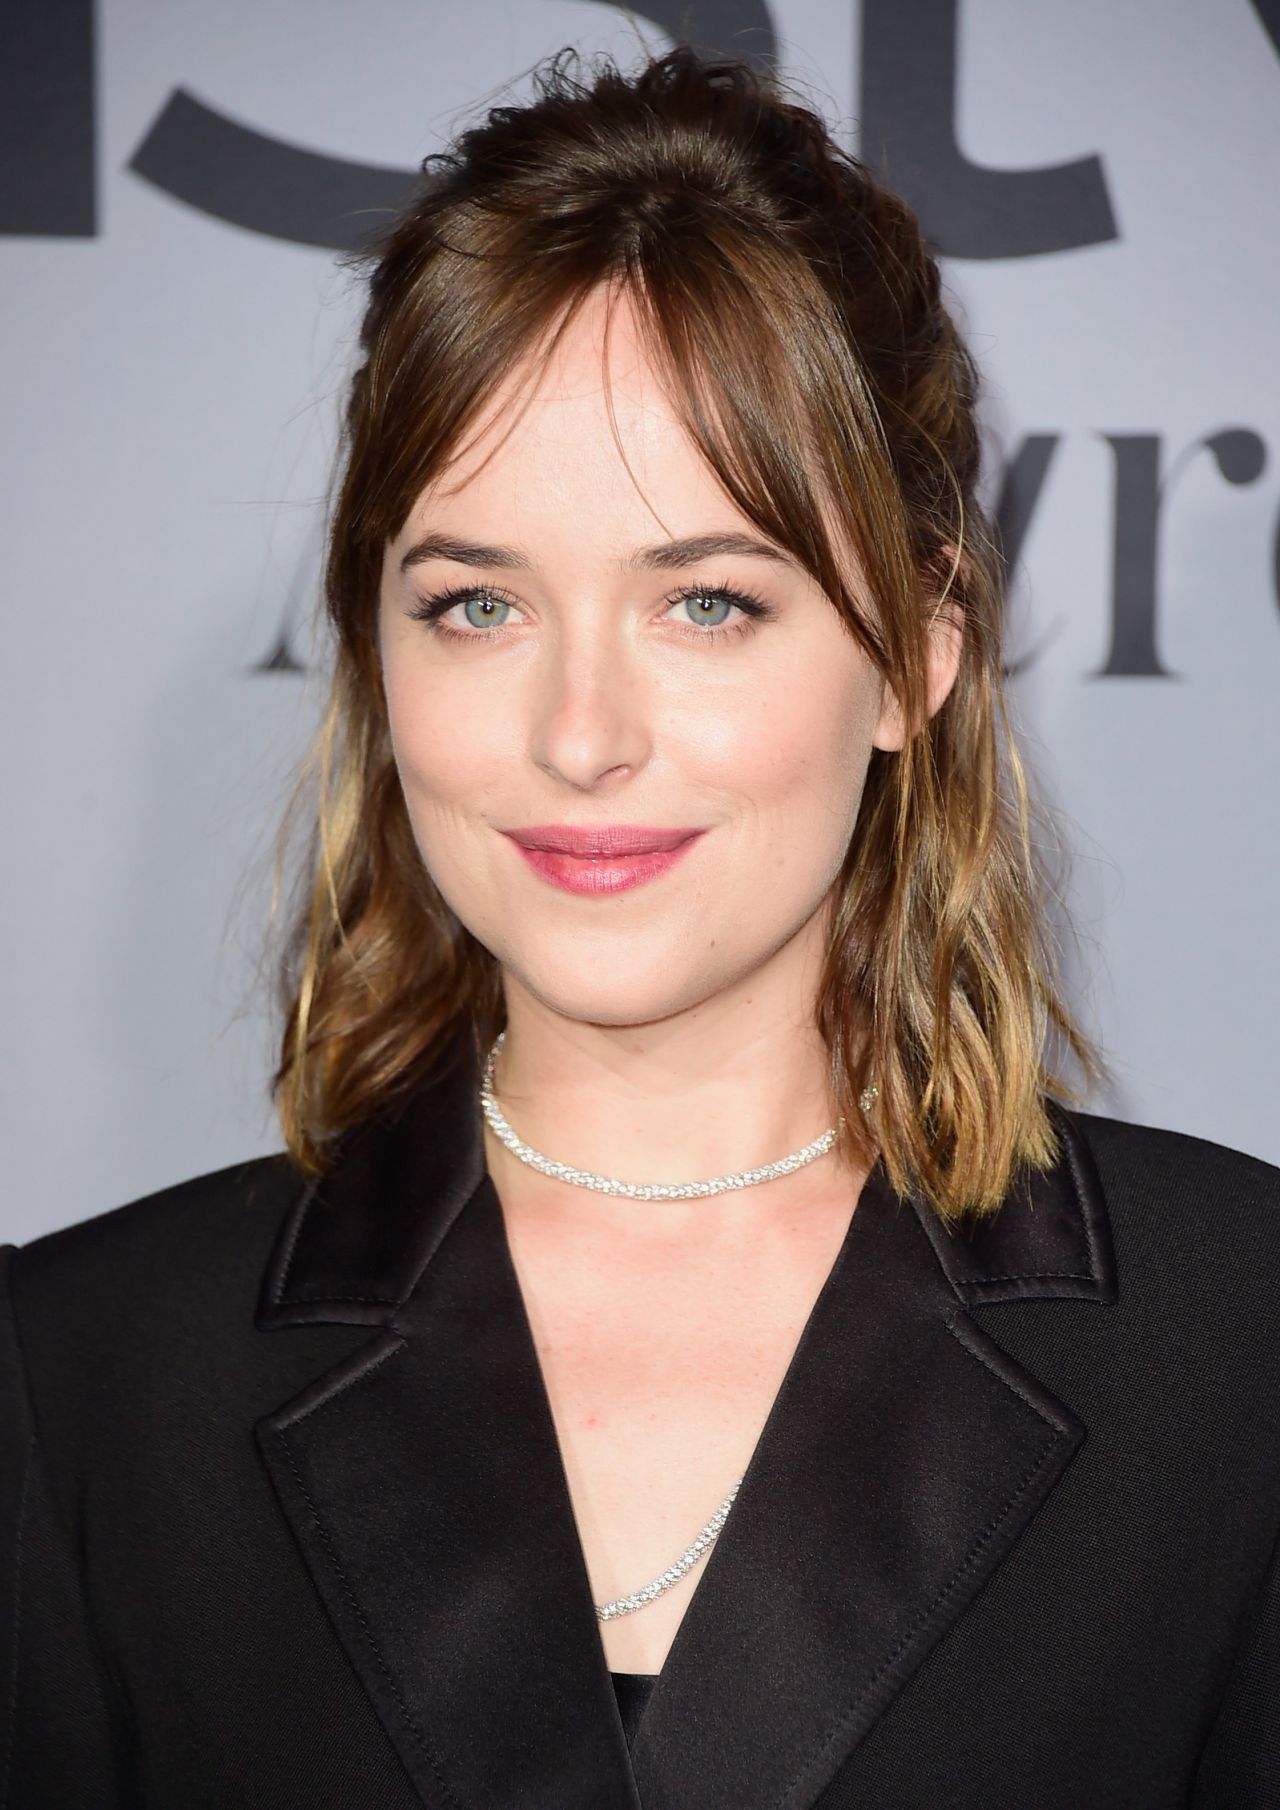 The 30+  Little Known Truths on Dakota Johnson! Dakota johnson was someone who always made heads turn and was built for bigger things because of her lineage.